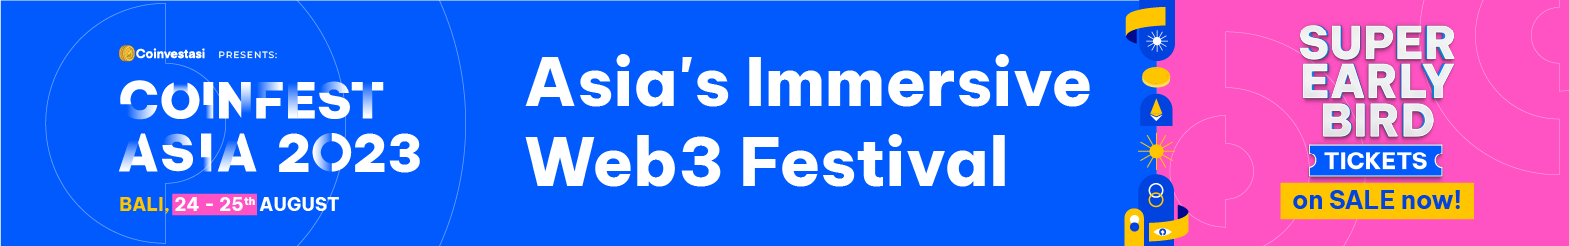 Coinfest 2023